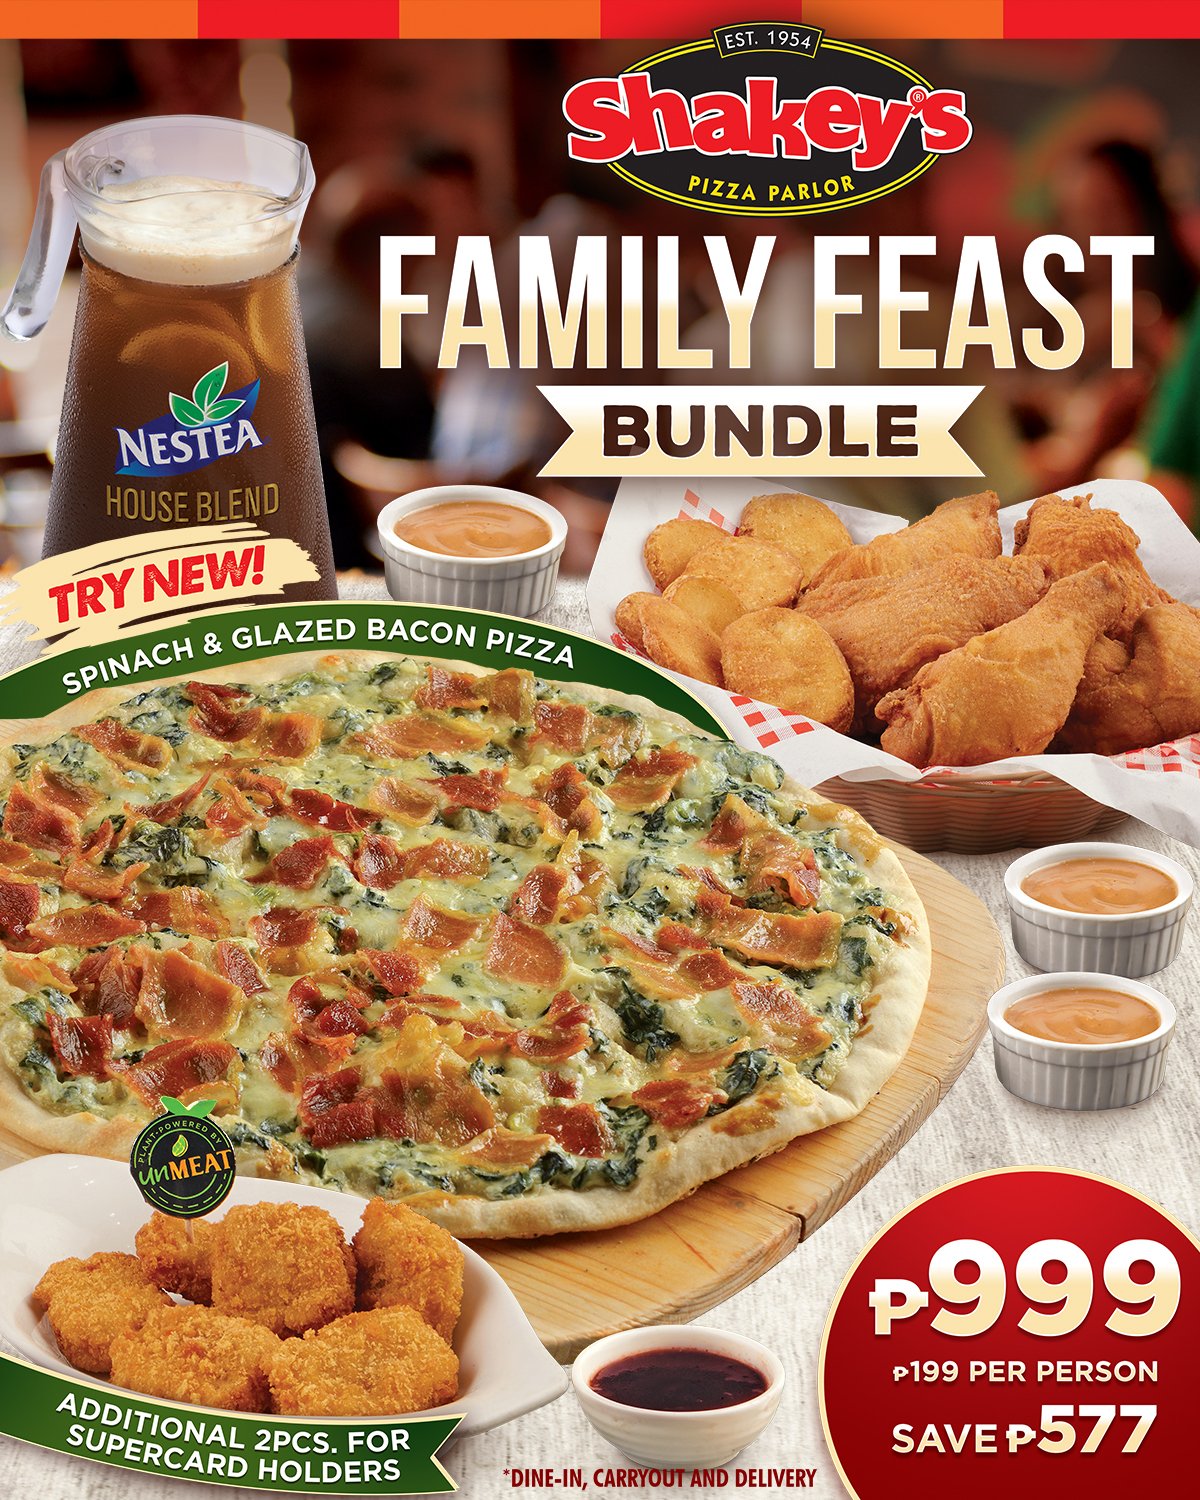 Shakey’s Duo Deal Bunch of Lunch and Family Feast Bundle PROUD KURIPOT